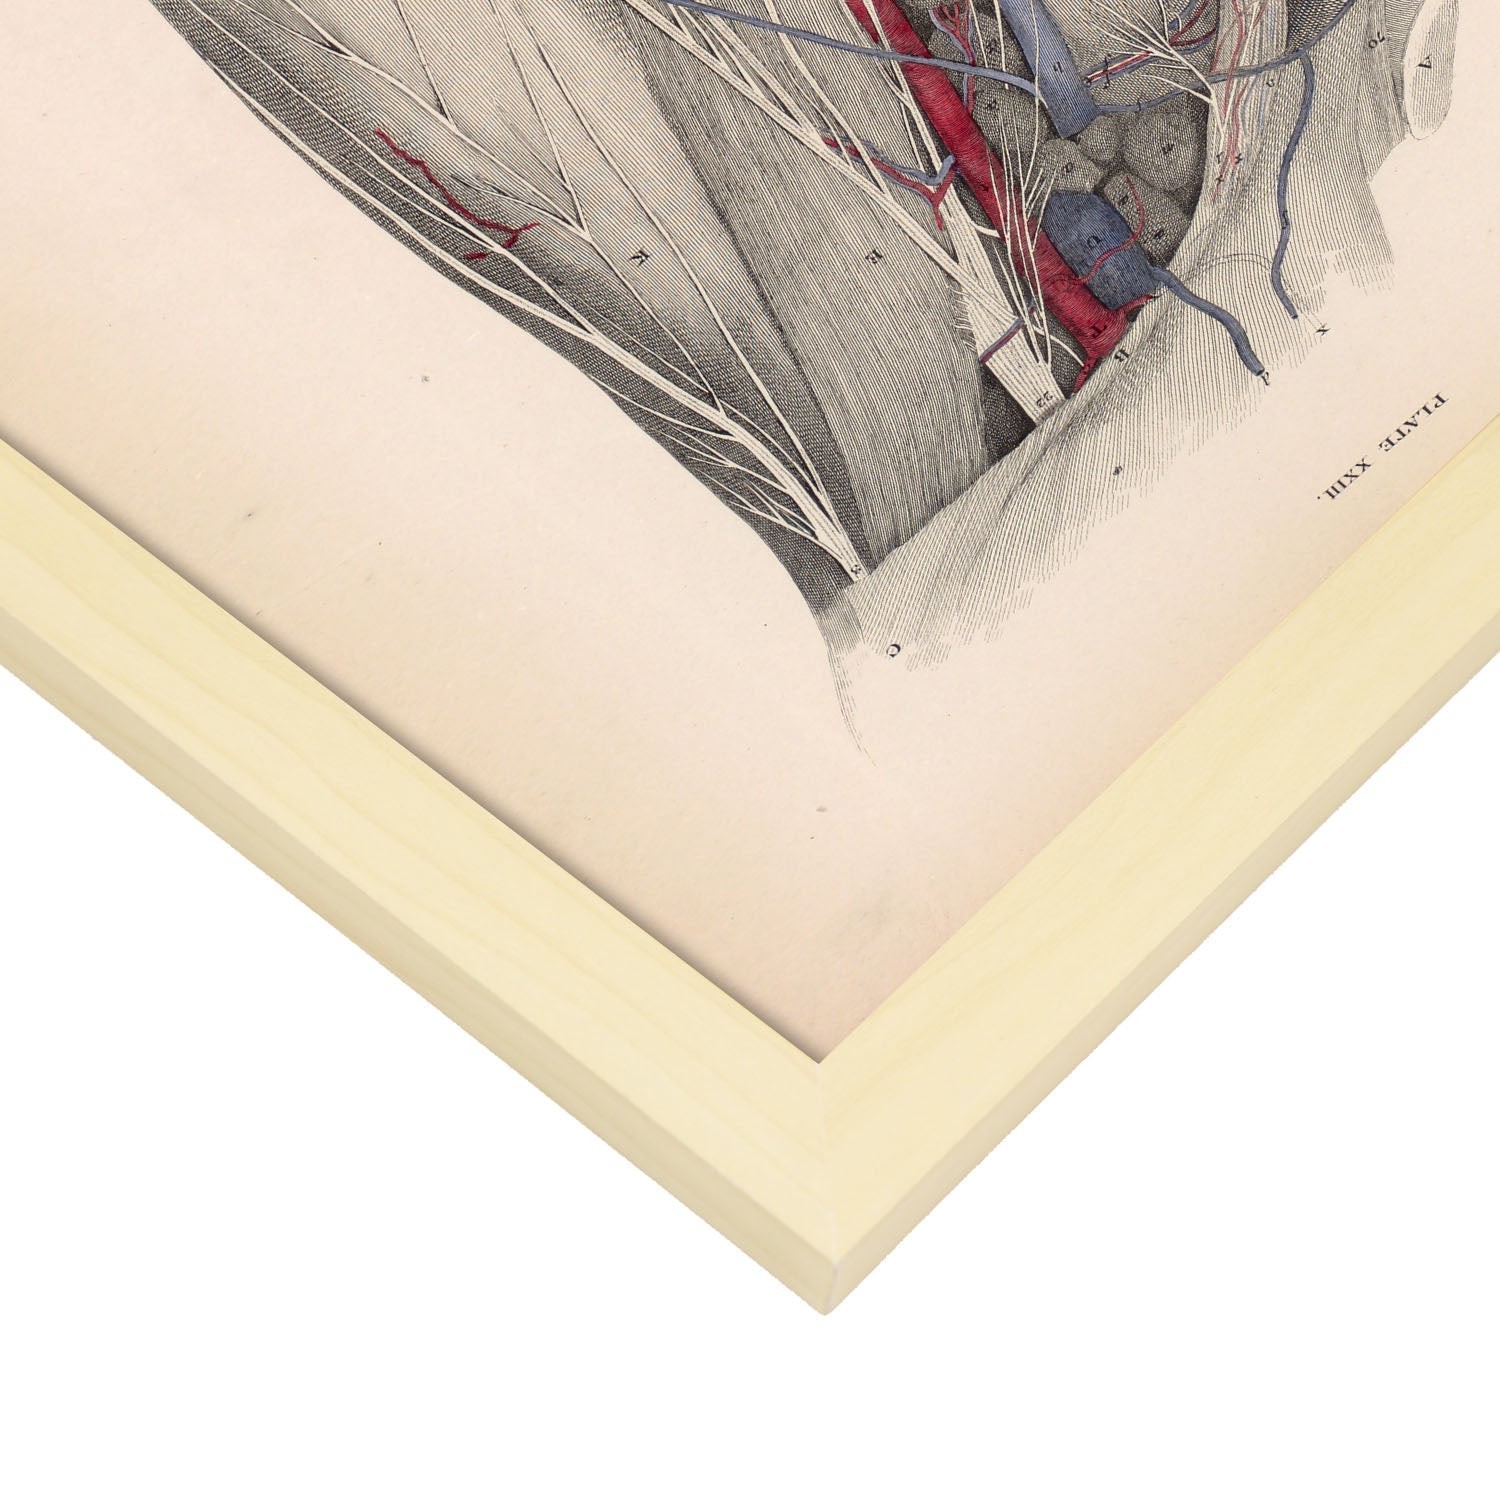 Dissection of the groin Deep dissection of femoral triangle-Artwork-Nacnic-Nacnic Estudio SL